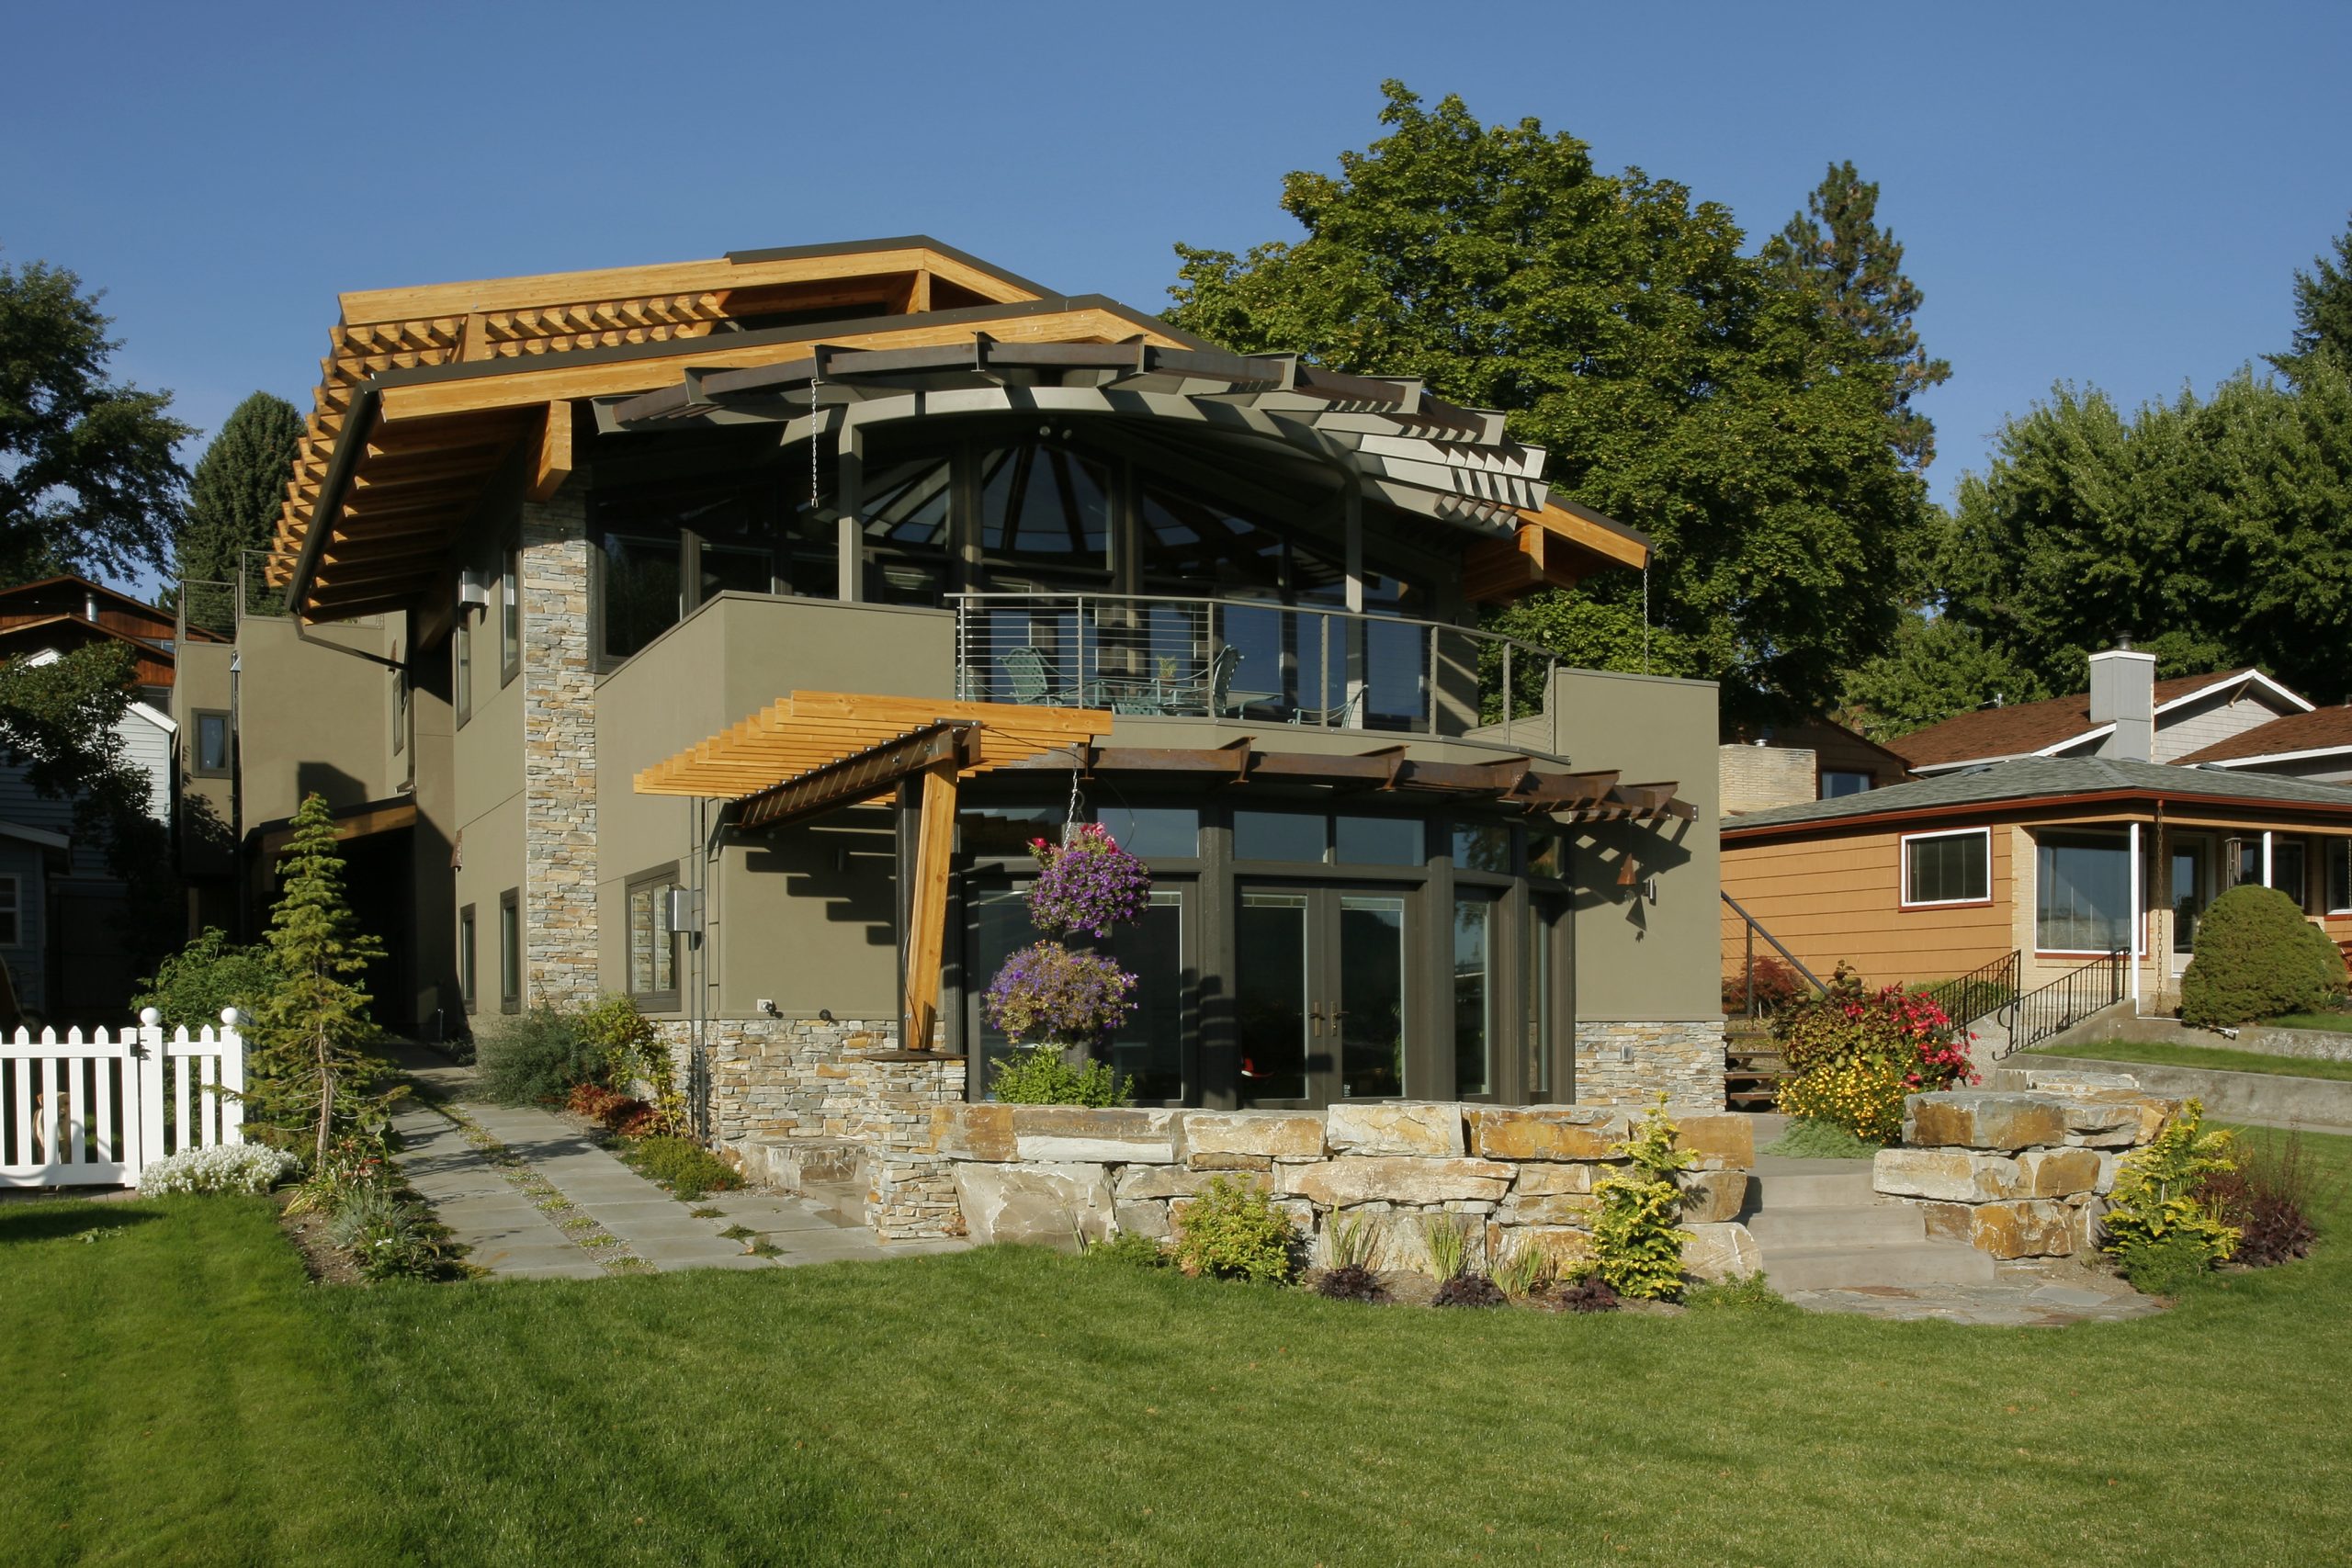 Exterior elevation of the Liberty Lake home with grass, rock, steps, exterior patio covering, veranda and roofline,